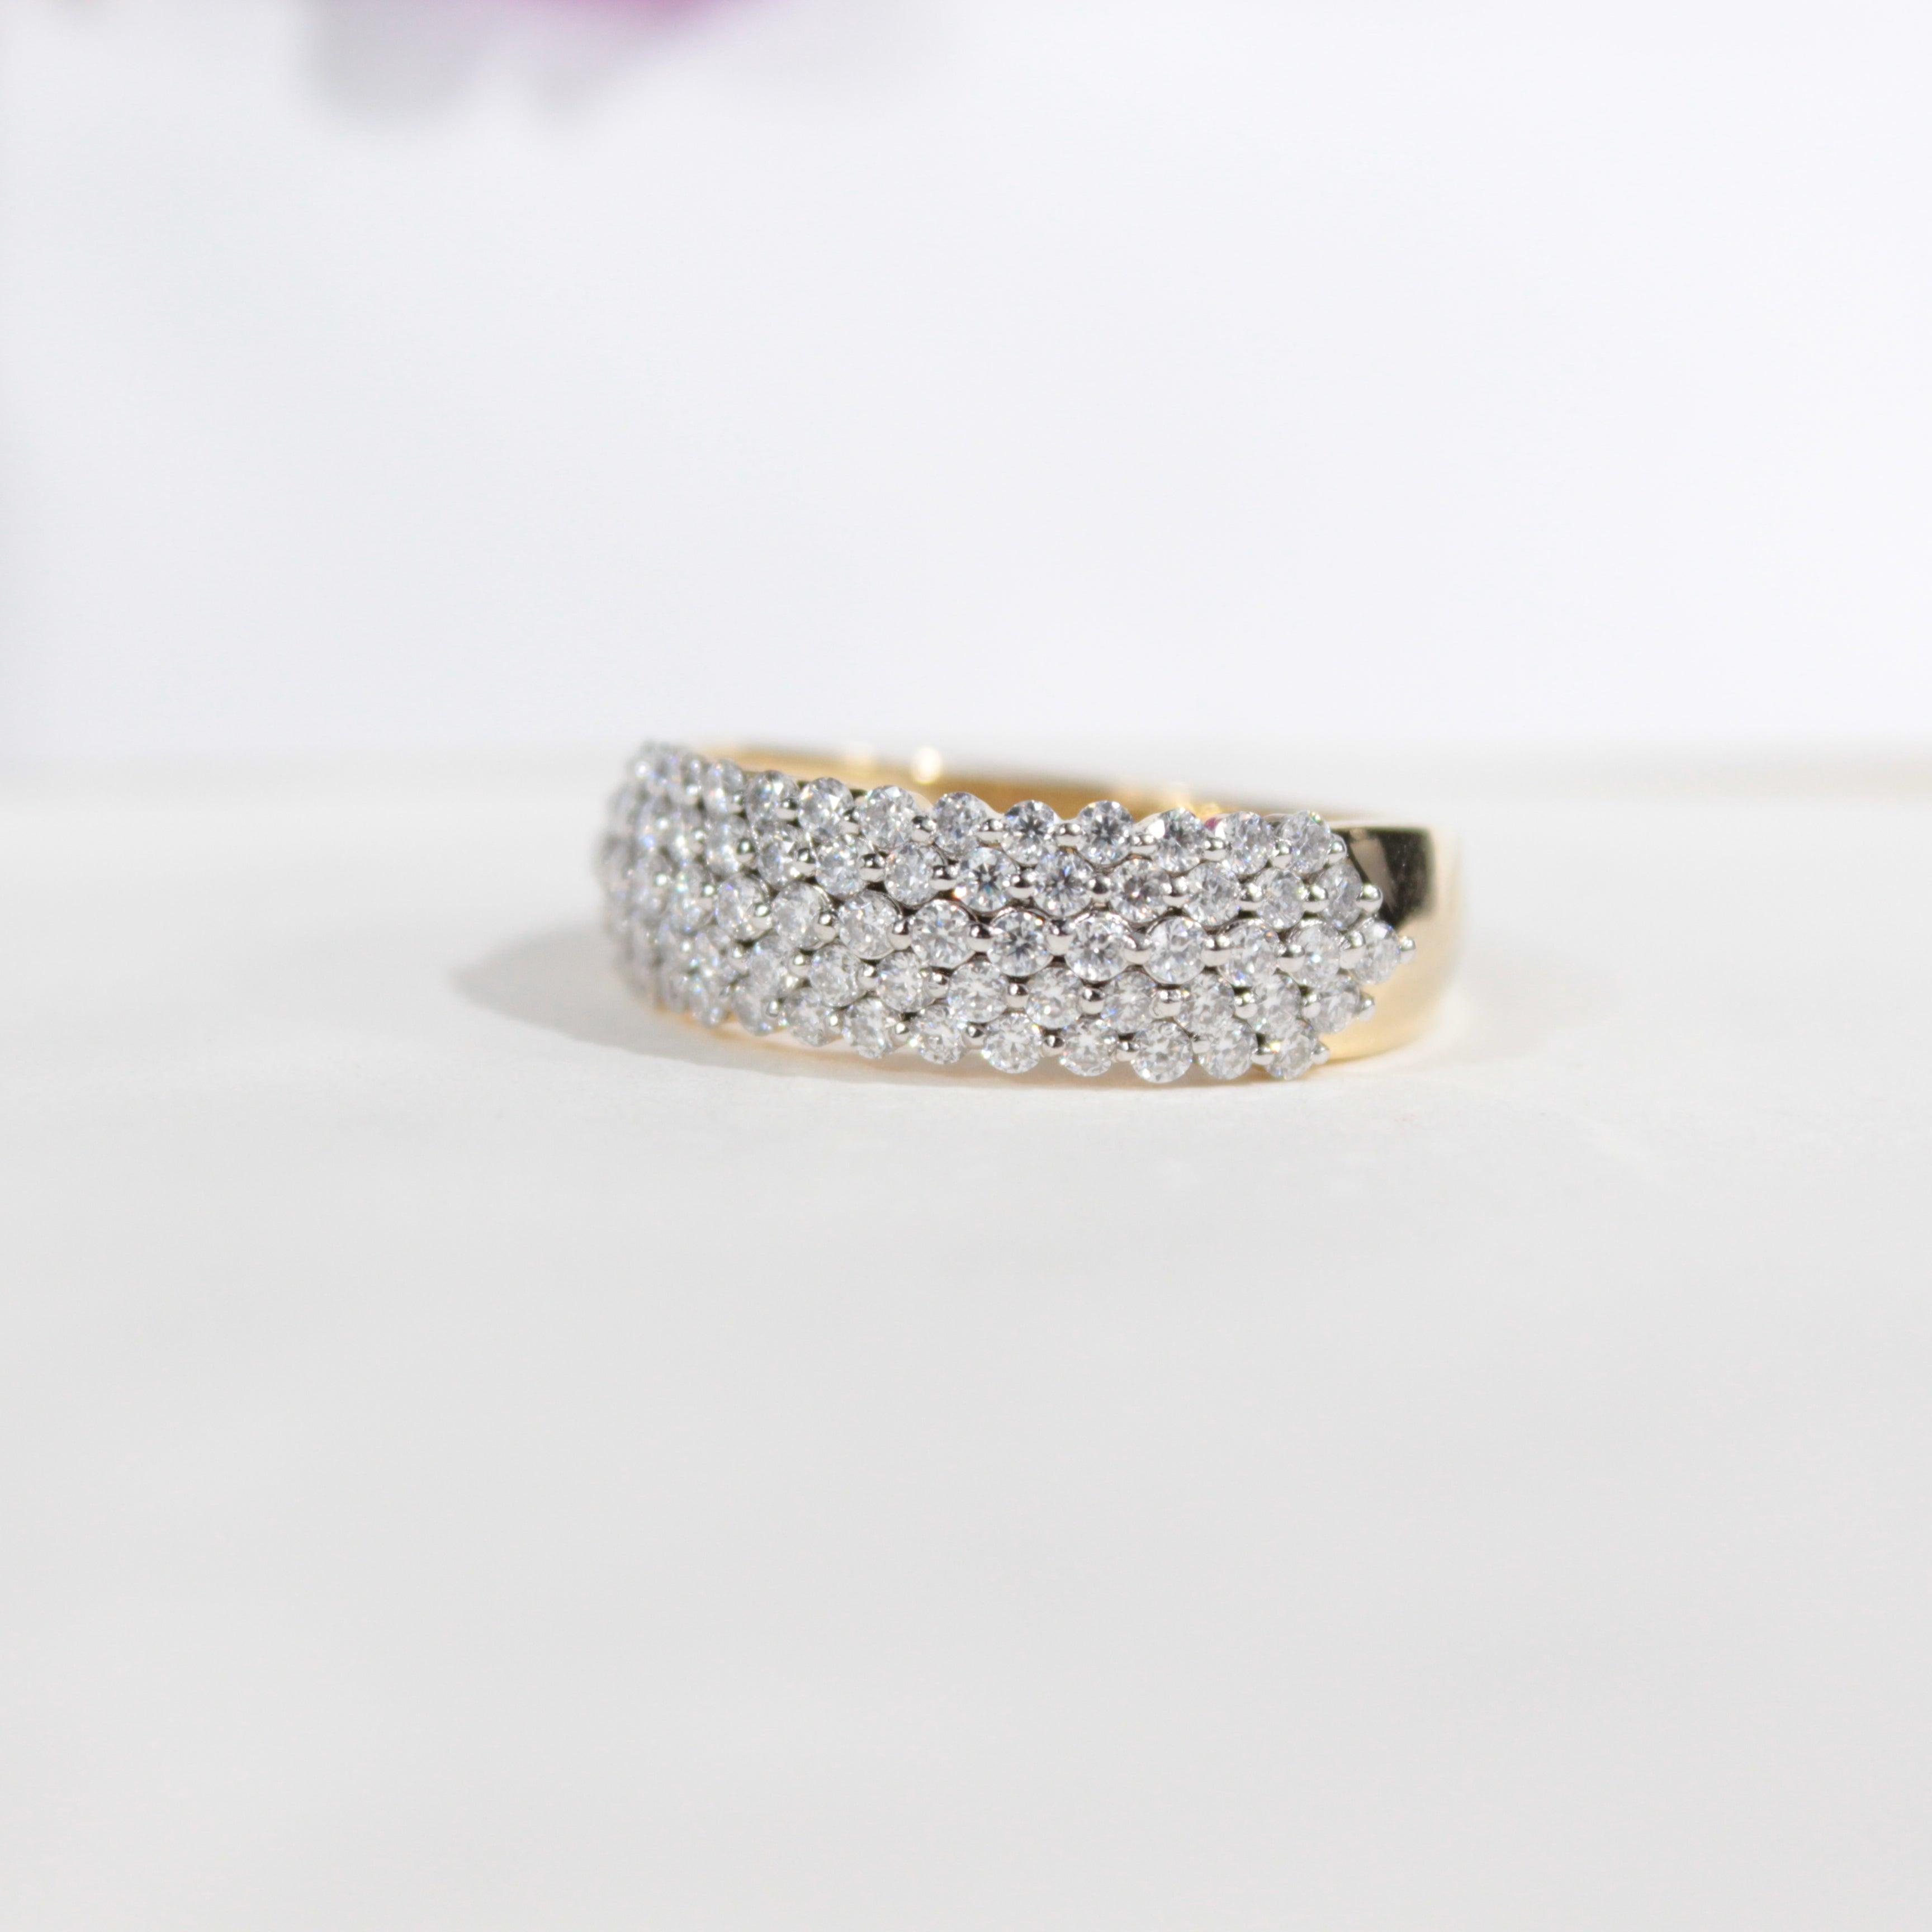 Eni Silver Band With Swarovski Stones For Women - Shinez By Baxi Jewellers